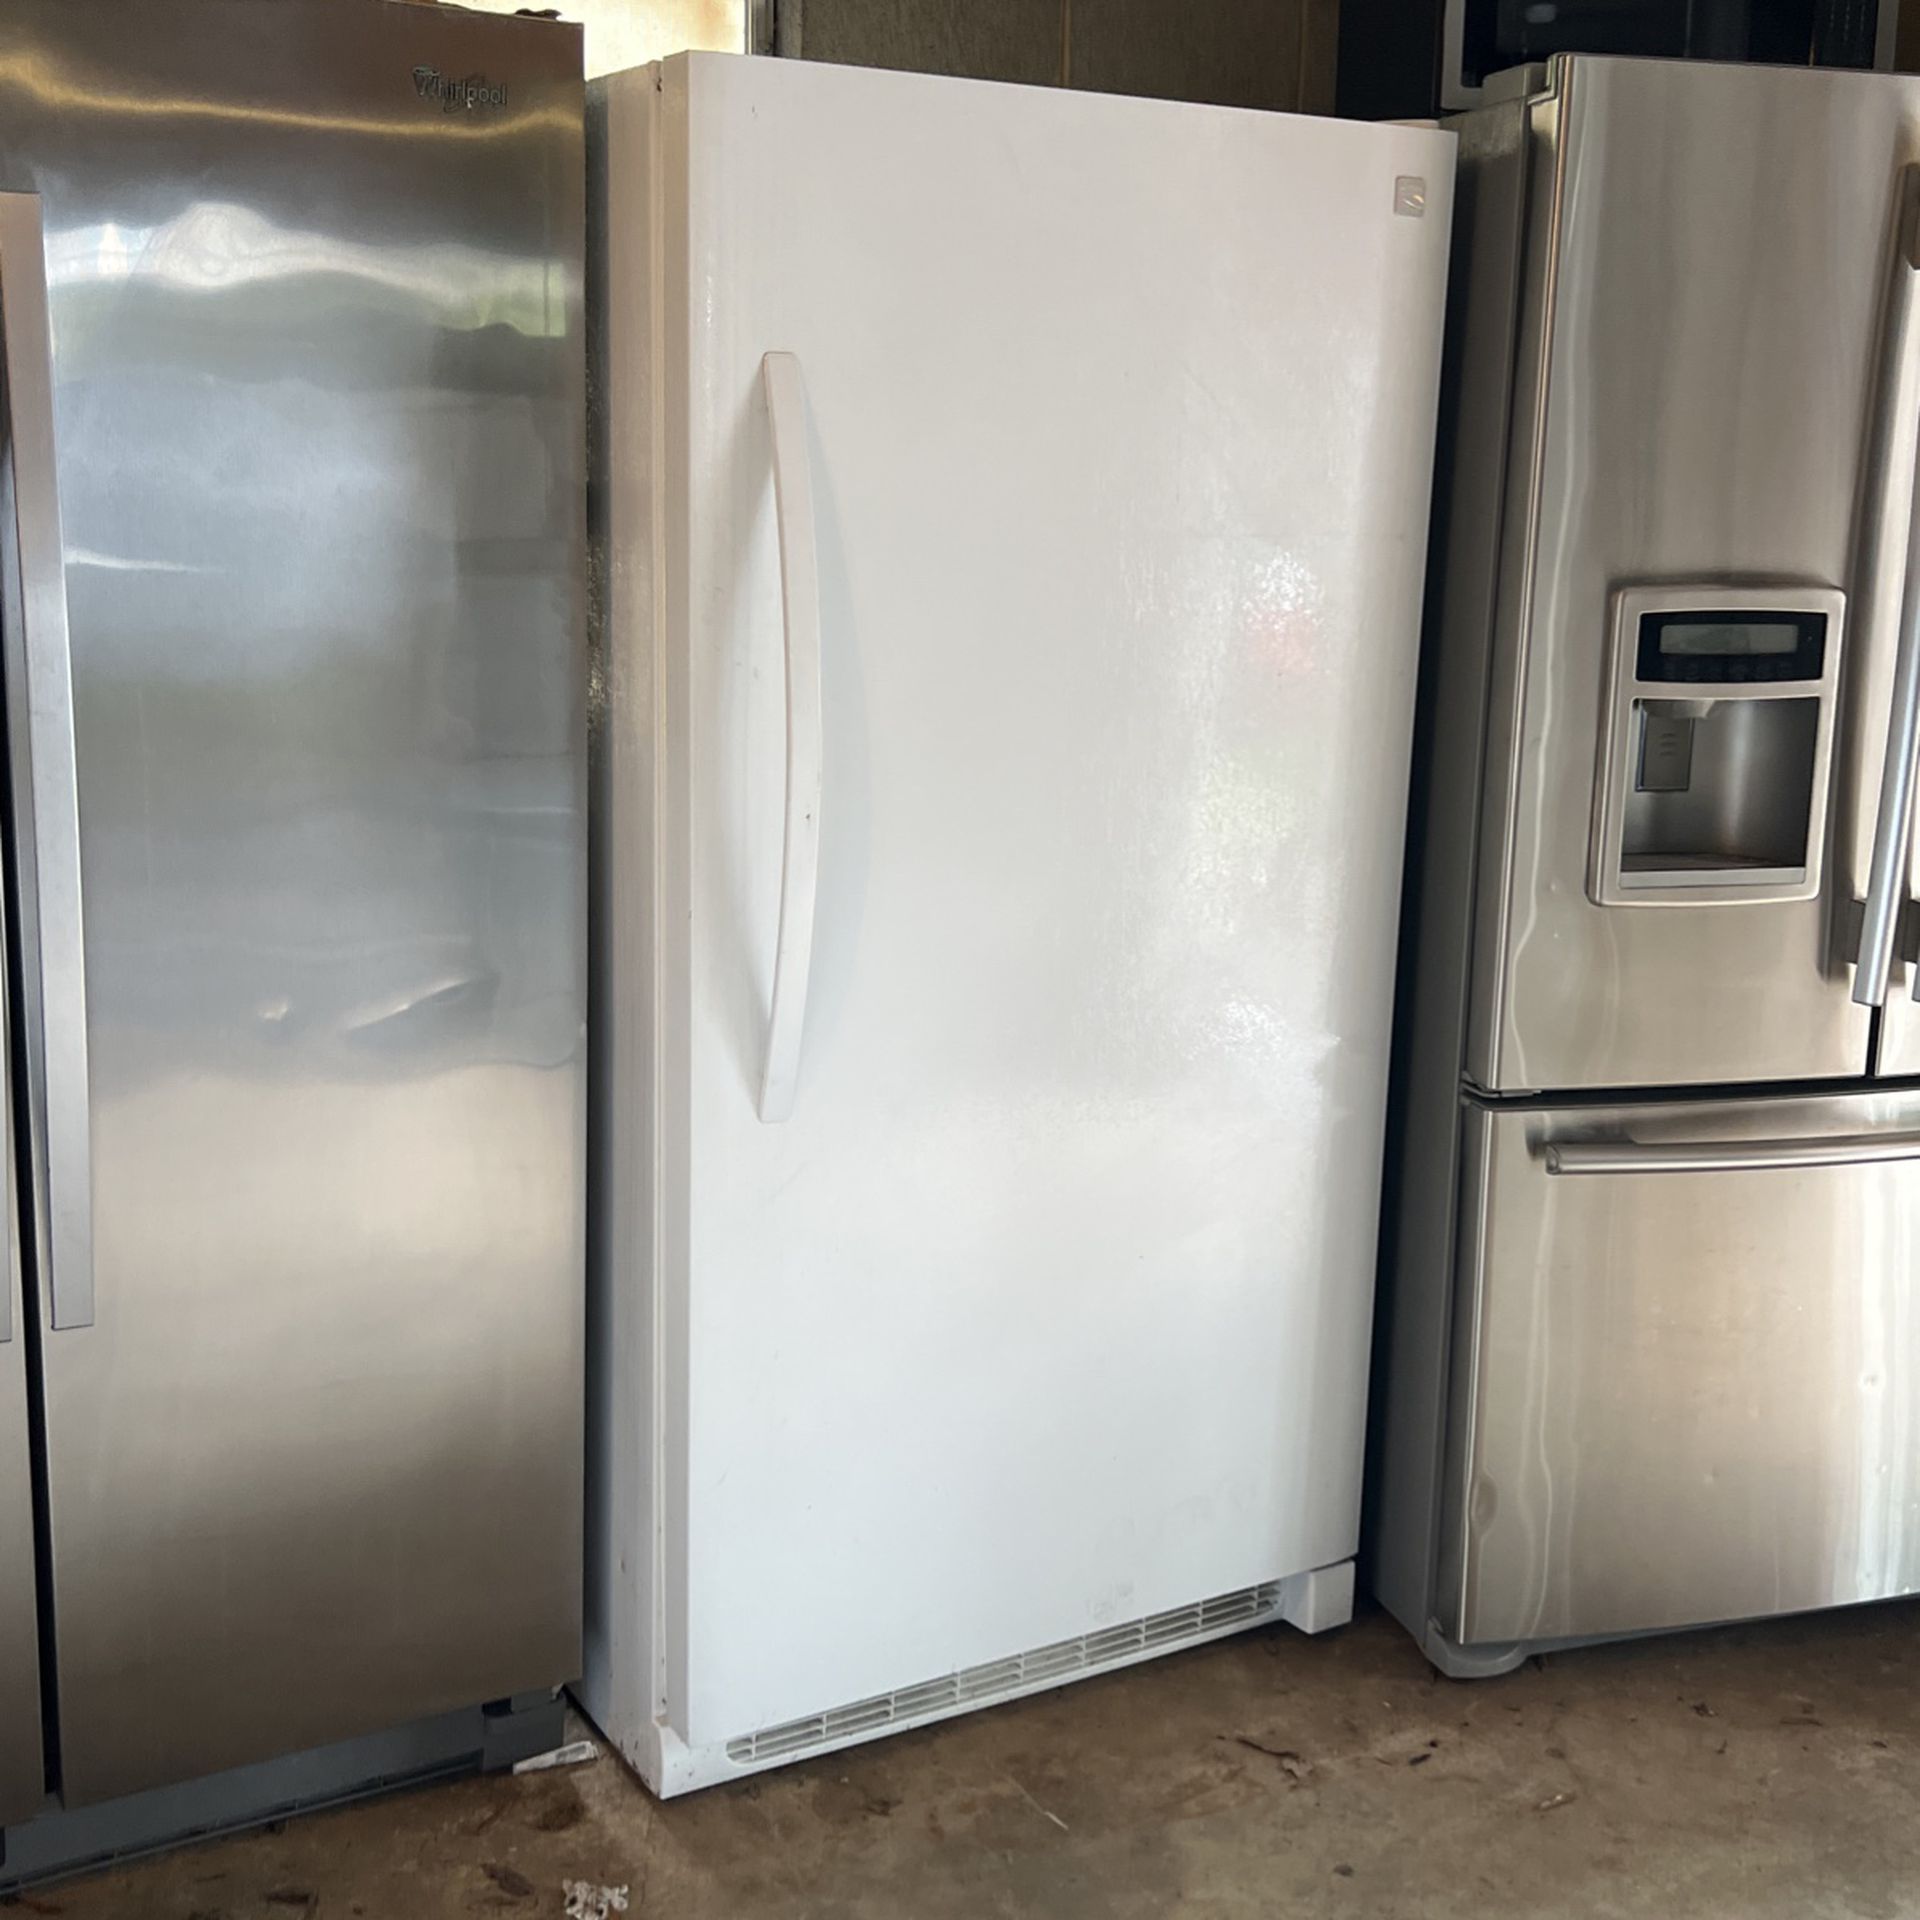 Kenmore upright freezer in very good condition